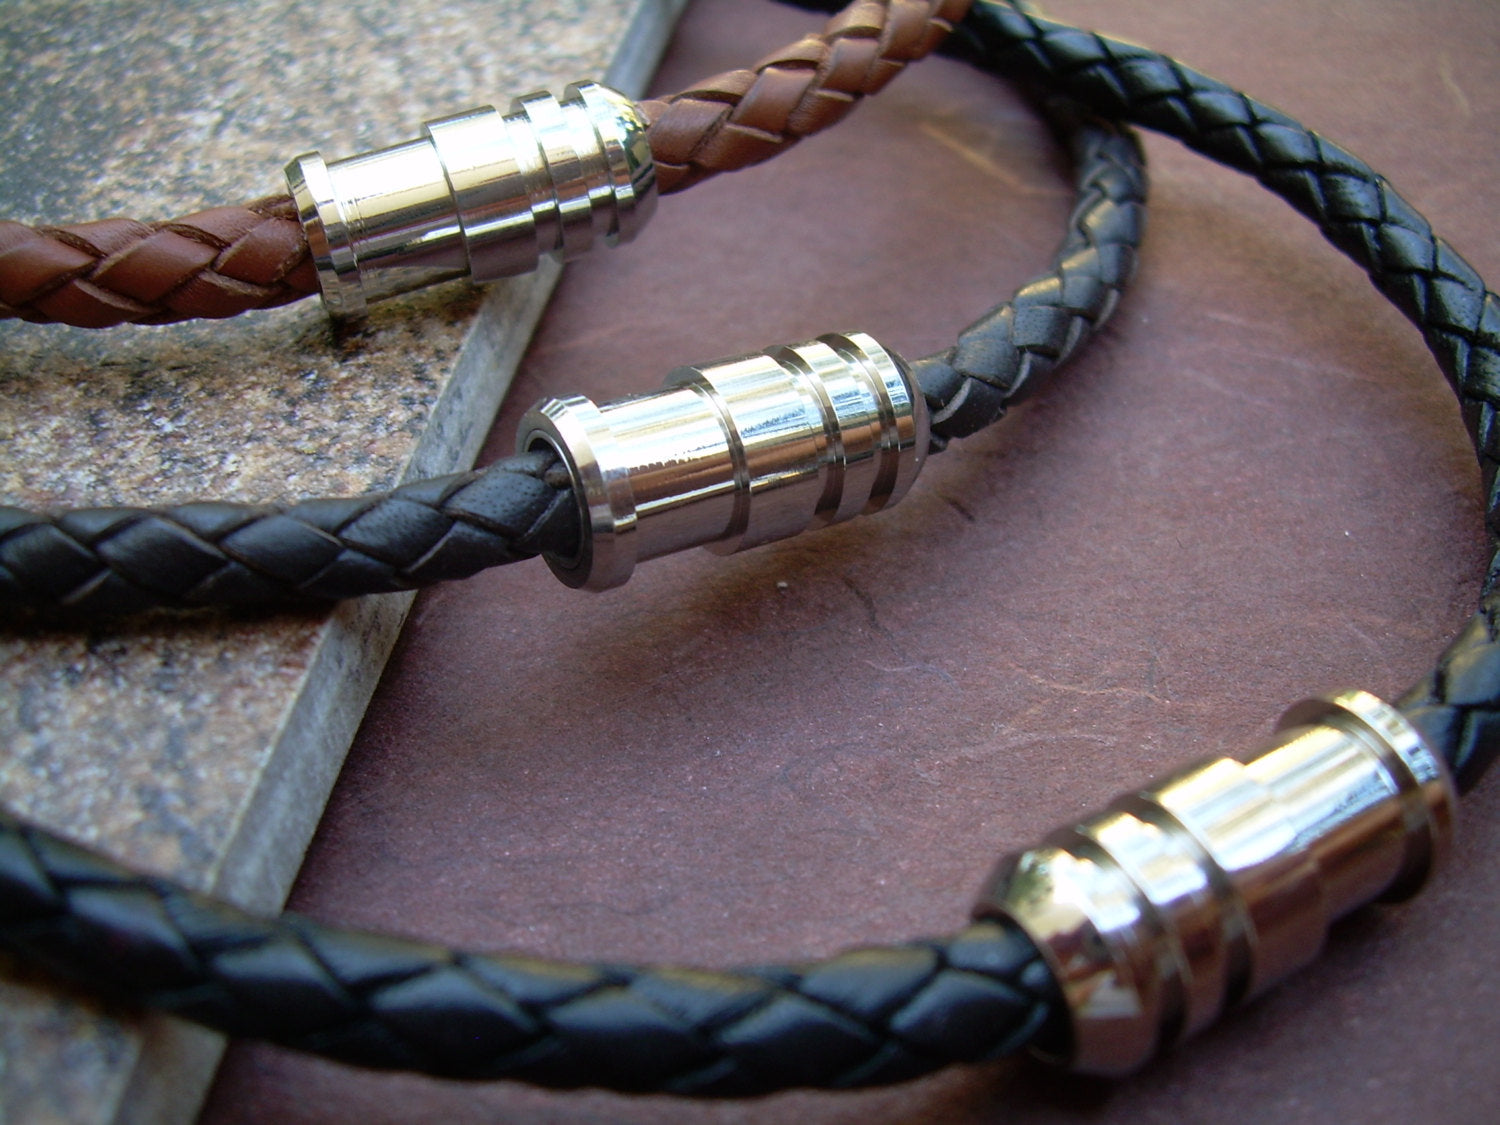 Mens Leather Necklace Magnetic Clasp Man Necklace Mens 